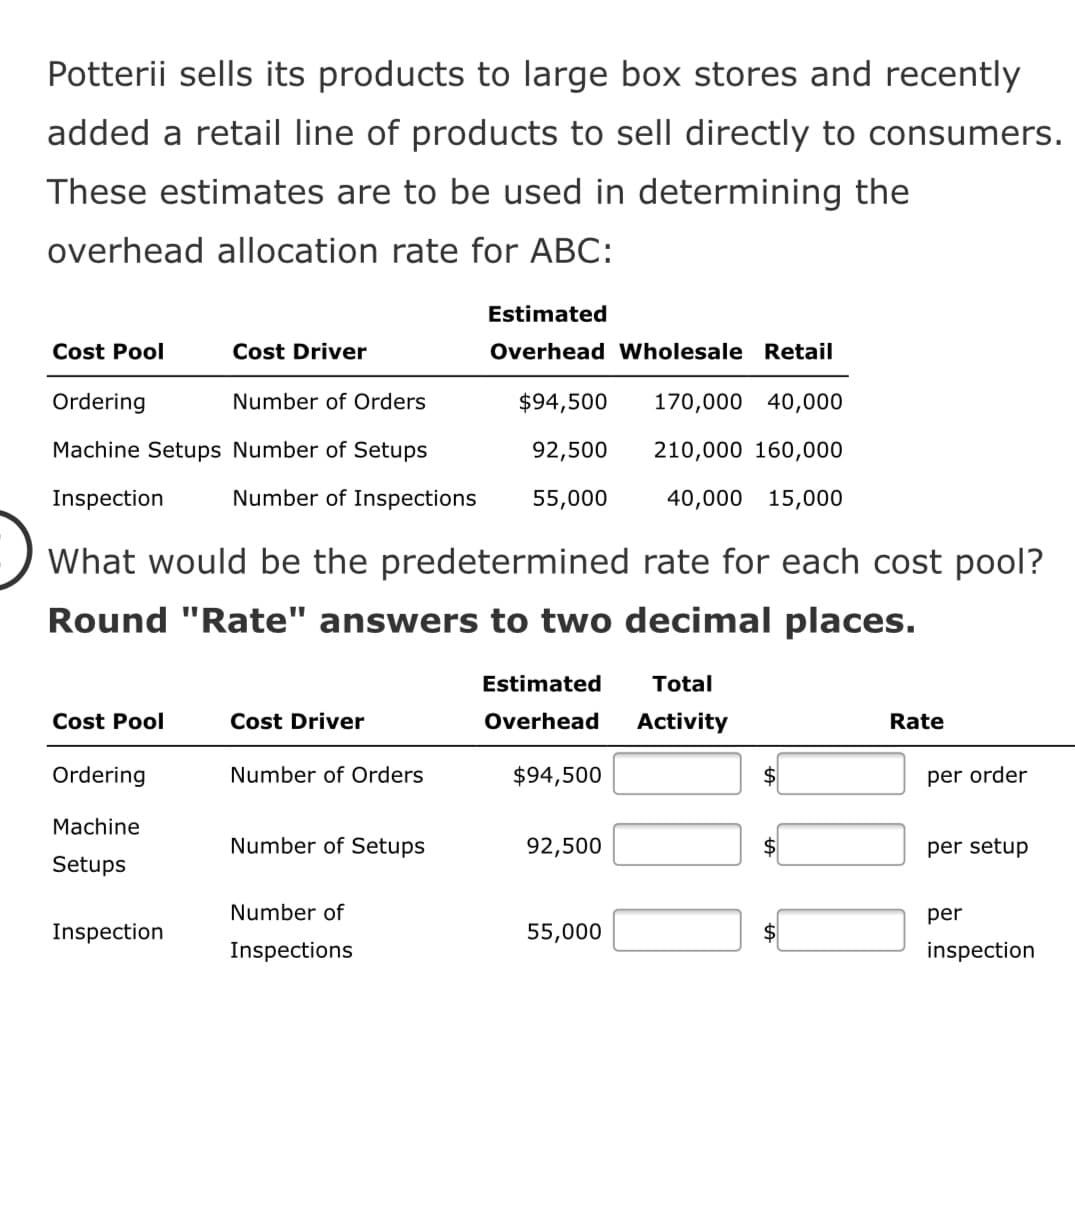 Potterii sells its products to large box stores and recently
added a retail line of products to sell directly to consumers.
These estimates are to be used in determining the
overhead allocation rate for ABC:
Estimated
Cost Pool
Cost Driver
Overhead Wholesale Retail
Ordering
Number of Orders
$94,500
170,000 40,000
Machine Setups Number of Setups
92,500
210,000 160,000
Inspection
Number of Inspections
55,000
40,000 15,000
What would be the predetermined rate for each cost pool?
Round "Rate" answers to two decimal places.
Estimated
Total
Cost Pool
Cost Driver
Overhead
Activity
Rate
Ordering
Number of Orders
$94,500
$
per order
Machine
Number of Setups
92,500
per setup
Setups
Number of
per
Inspection
55,000
2$
Inspections
inspection
